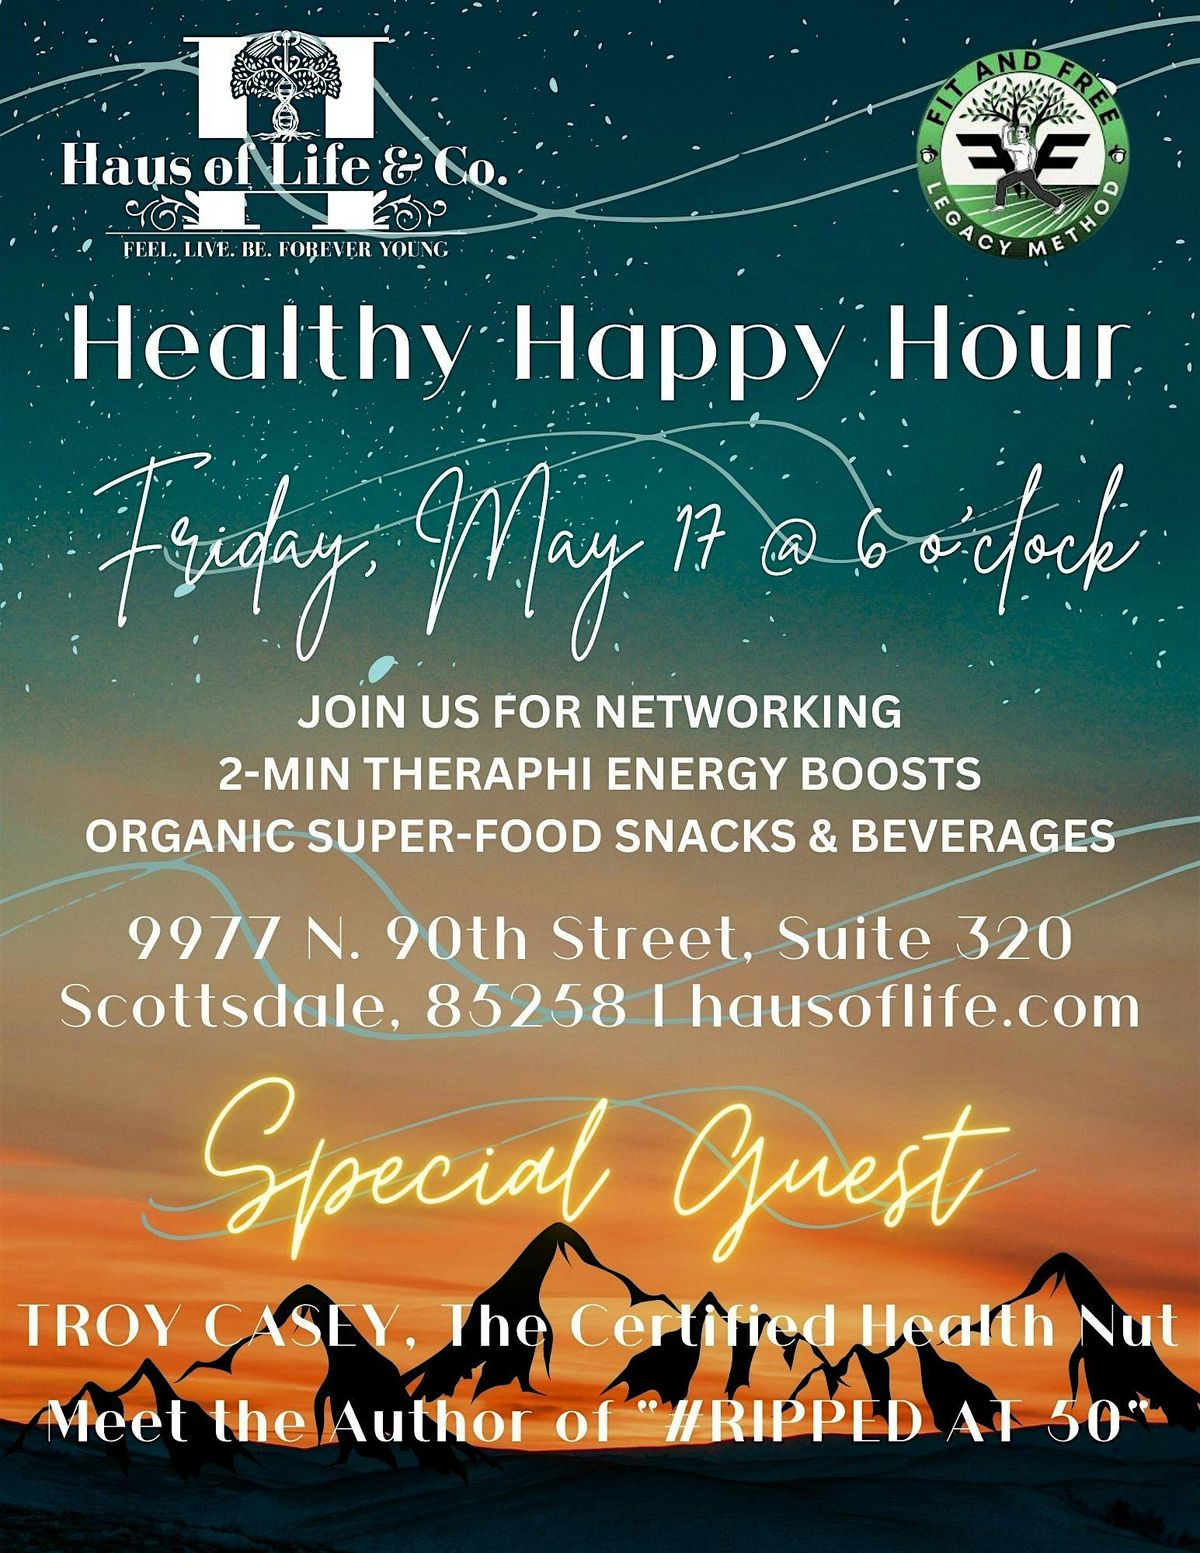 Healthy Happy Hour @ Haus of Life special guest Troy Casey "#Ripped at 50"